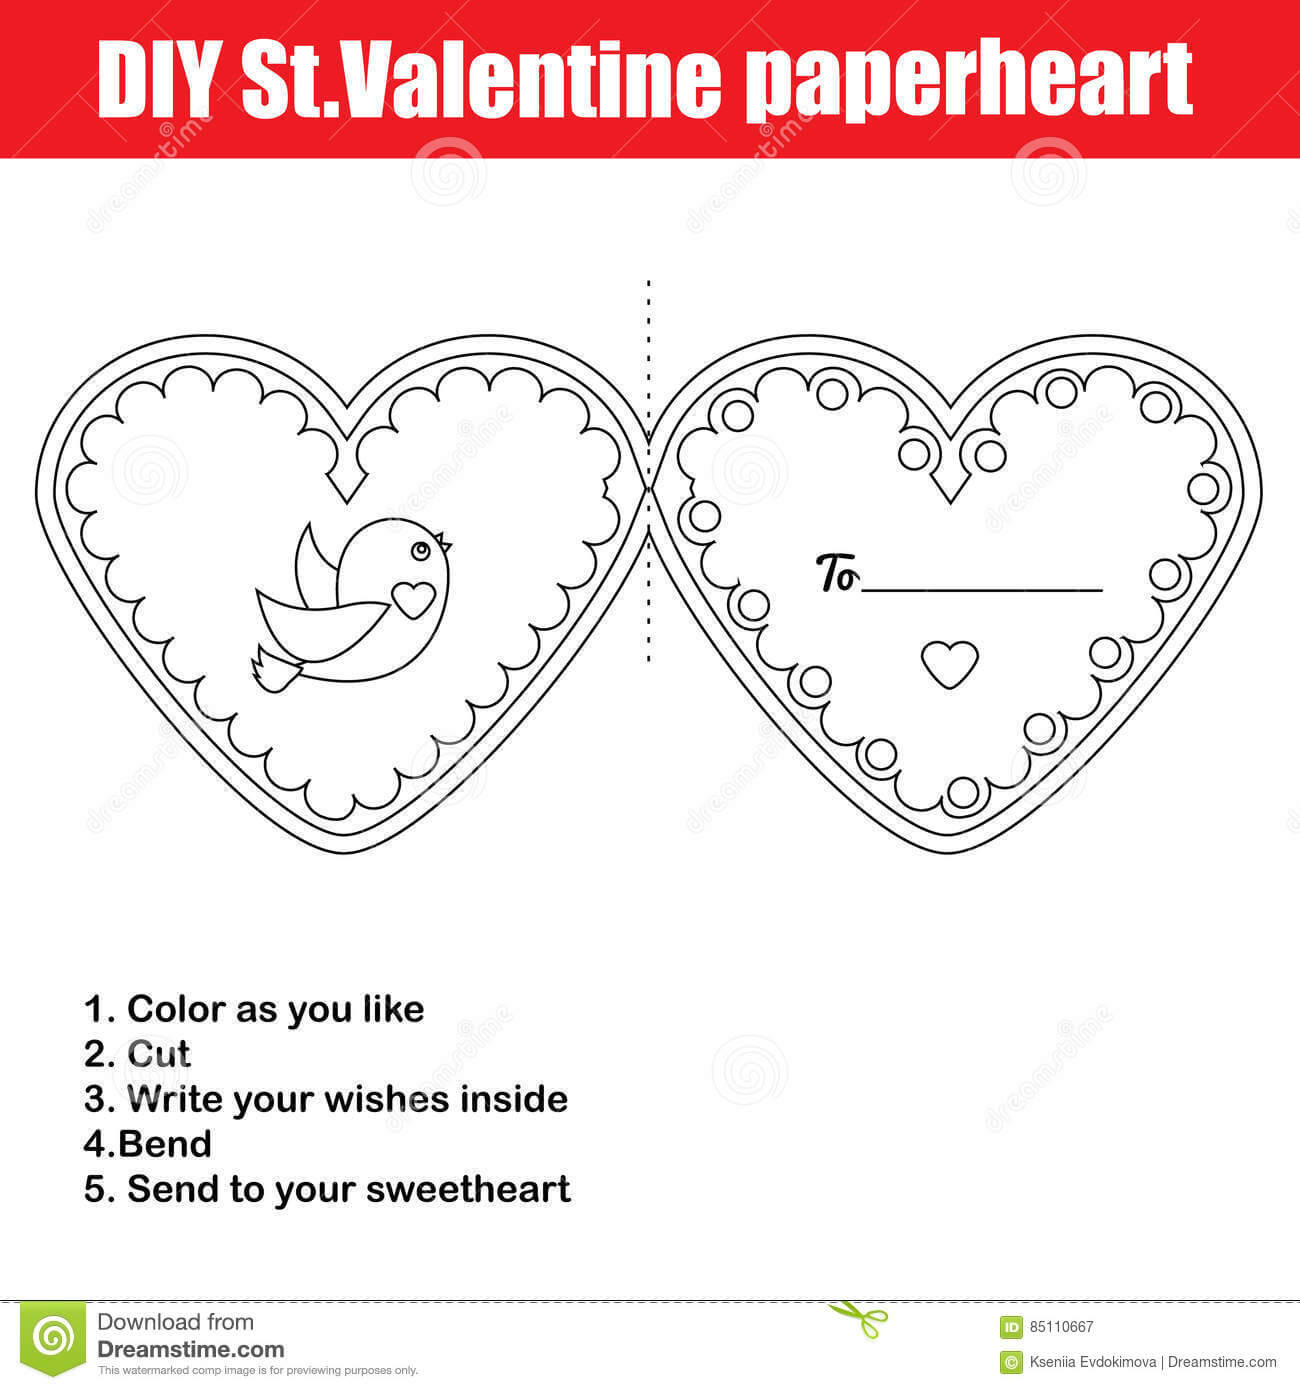 Diy Children Educational Creative Game. Make A Valentine Day Intended For Valentine Card Template For Kids